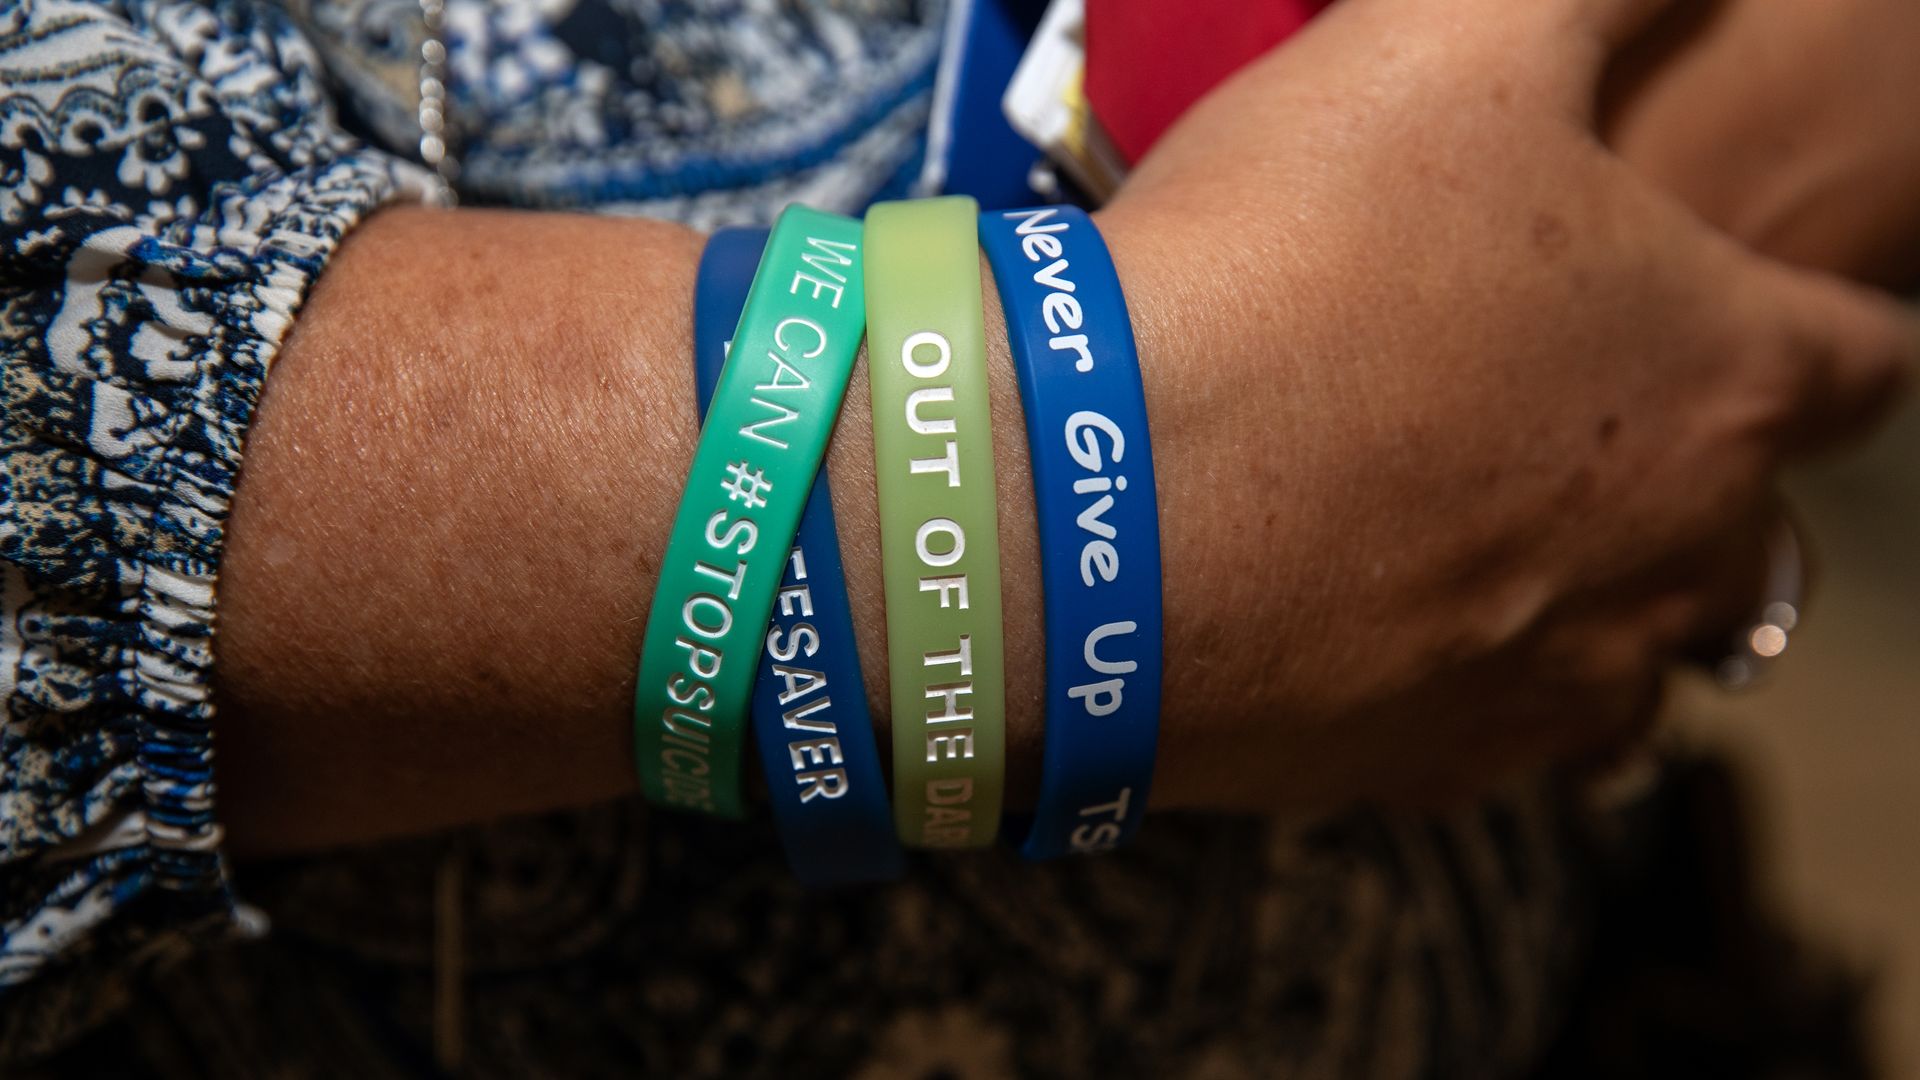 Shannon Geames from Tennessee, wears suicide prevention wristbands while lobbying Congress. 